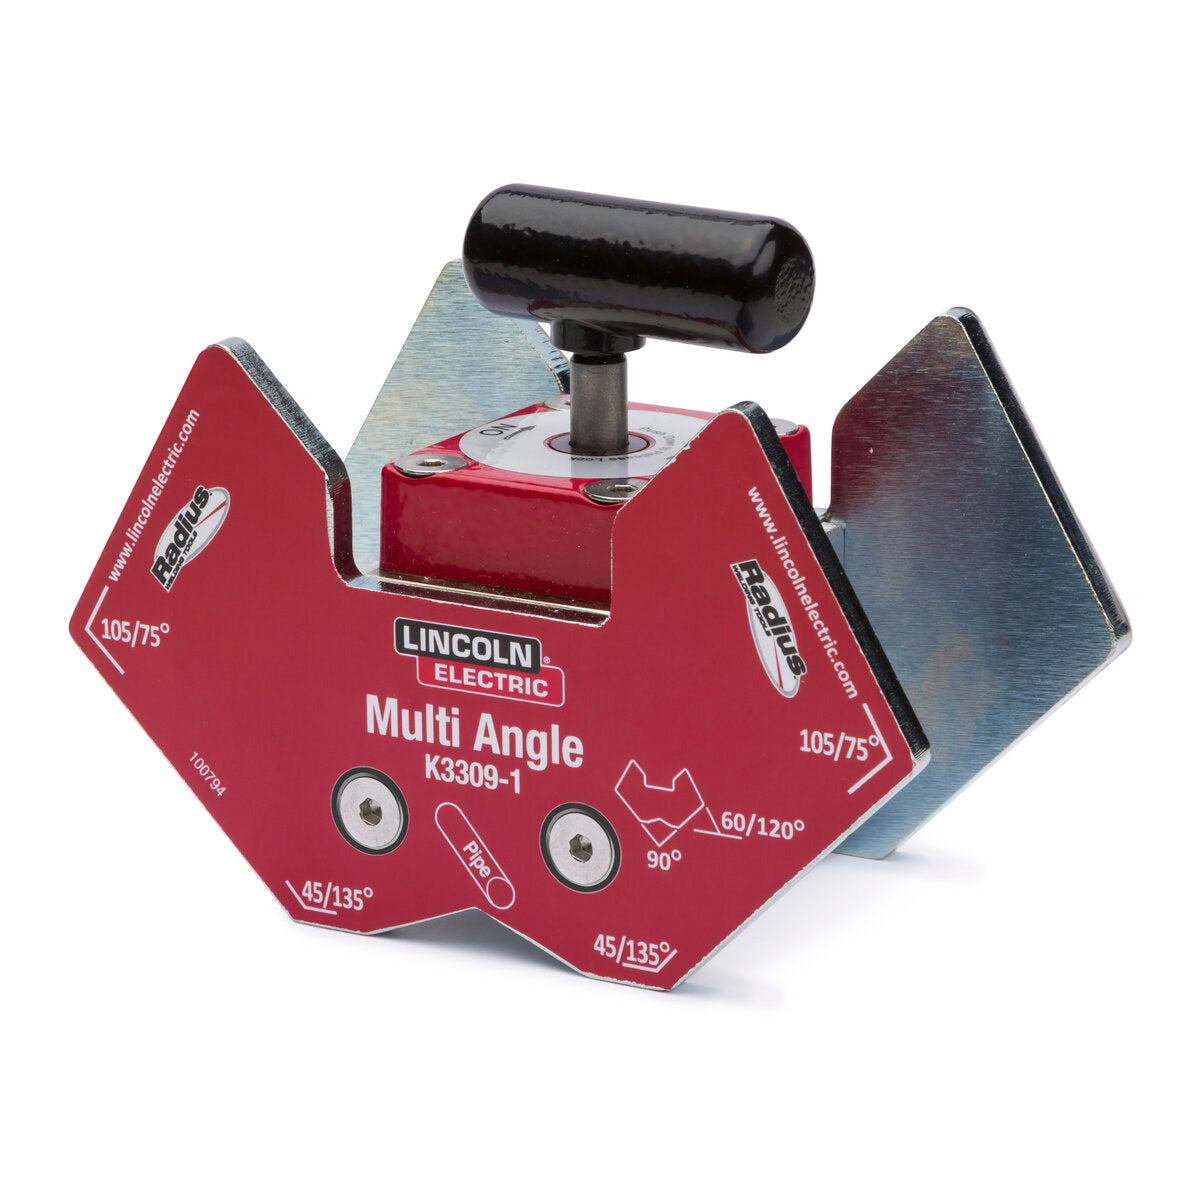 Lincoln Electric - Multi Angle Magnetic Fixture - K3309-1